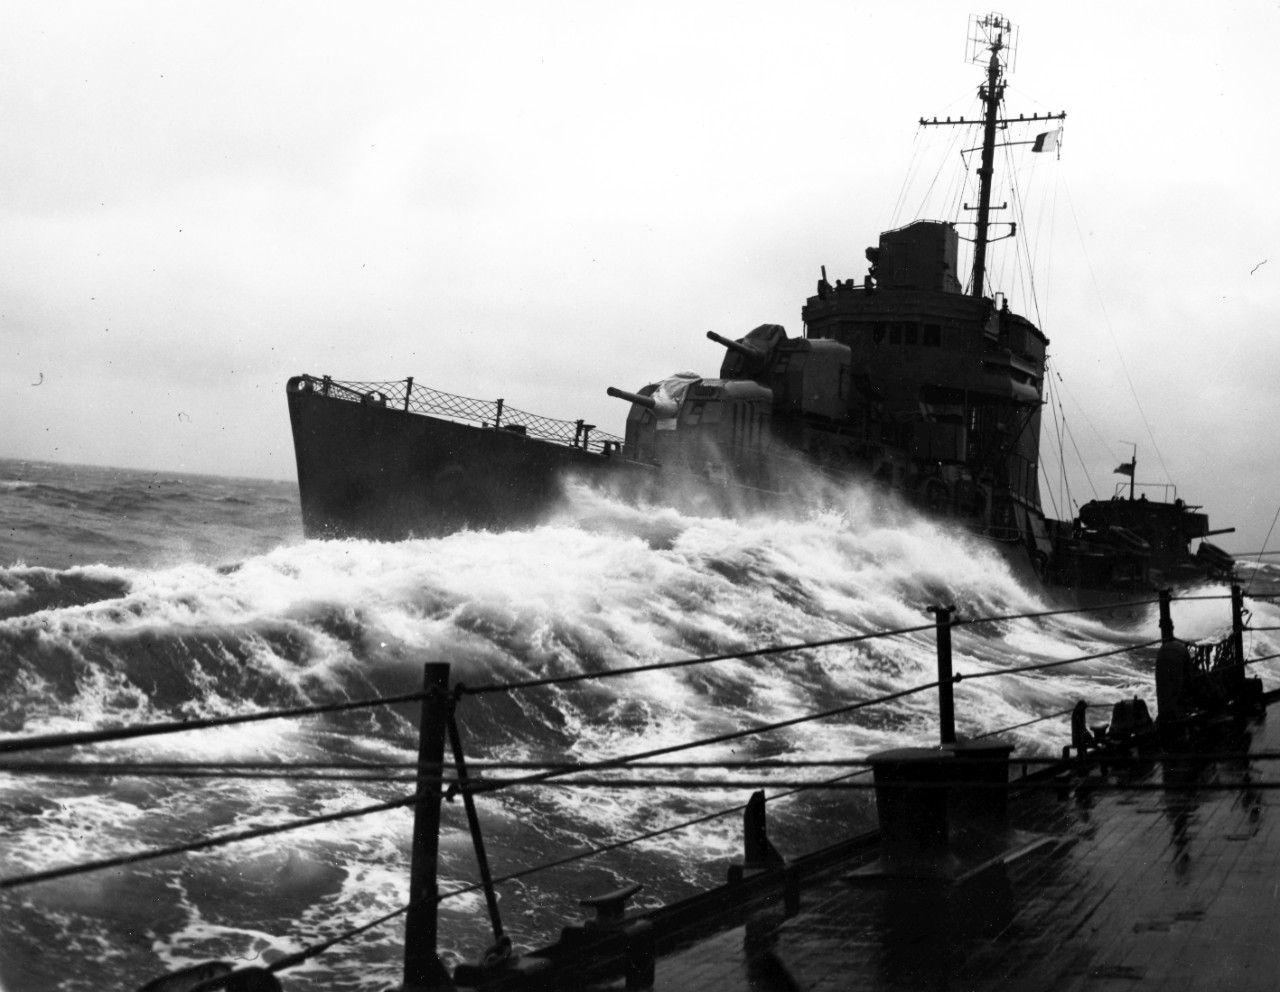 USS Bancroft (DD-598) in the Bering Sea under heavy weather, 1942. From the VADM Robert C. Giffen Photo Collection. 